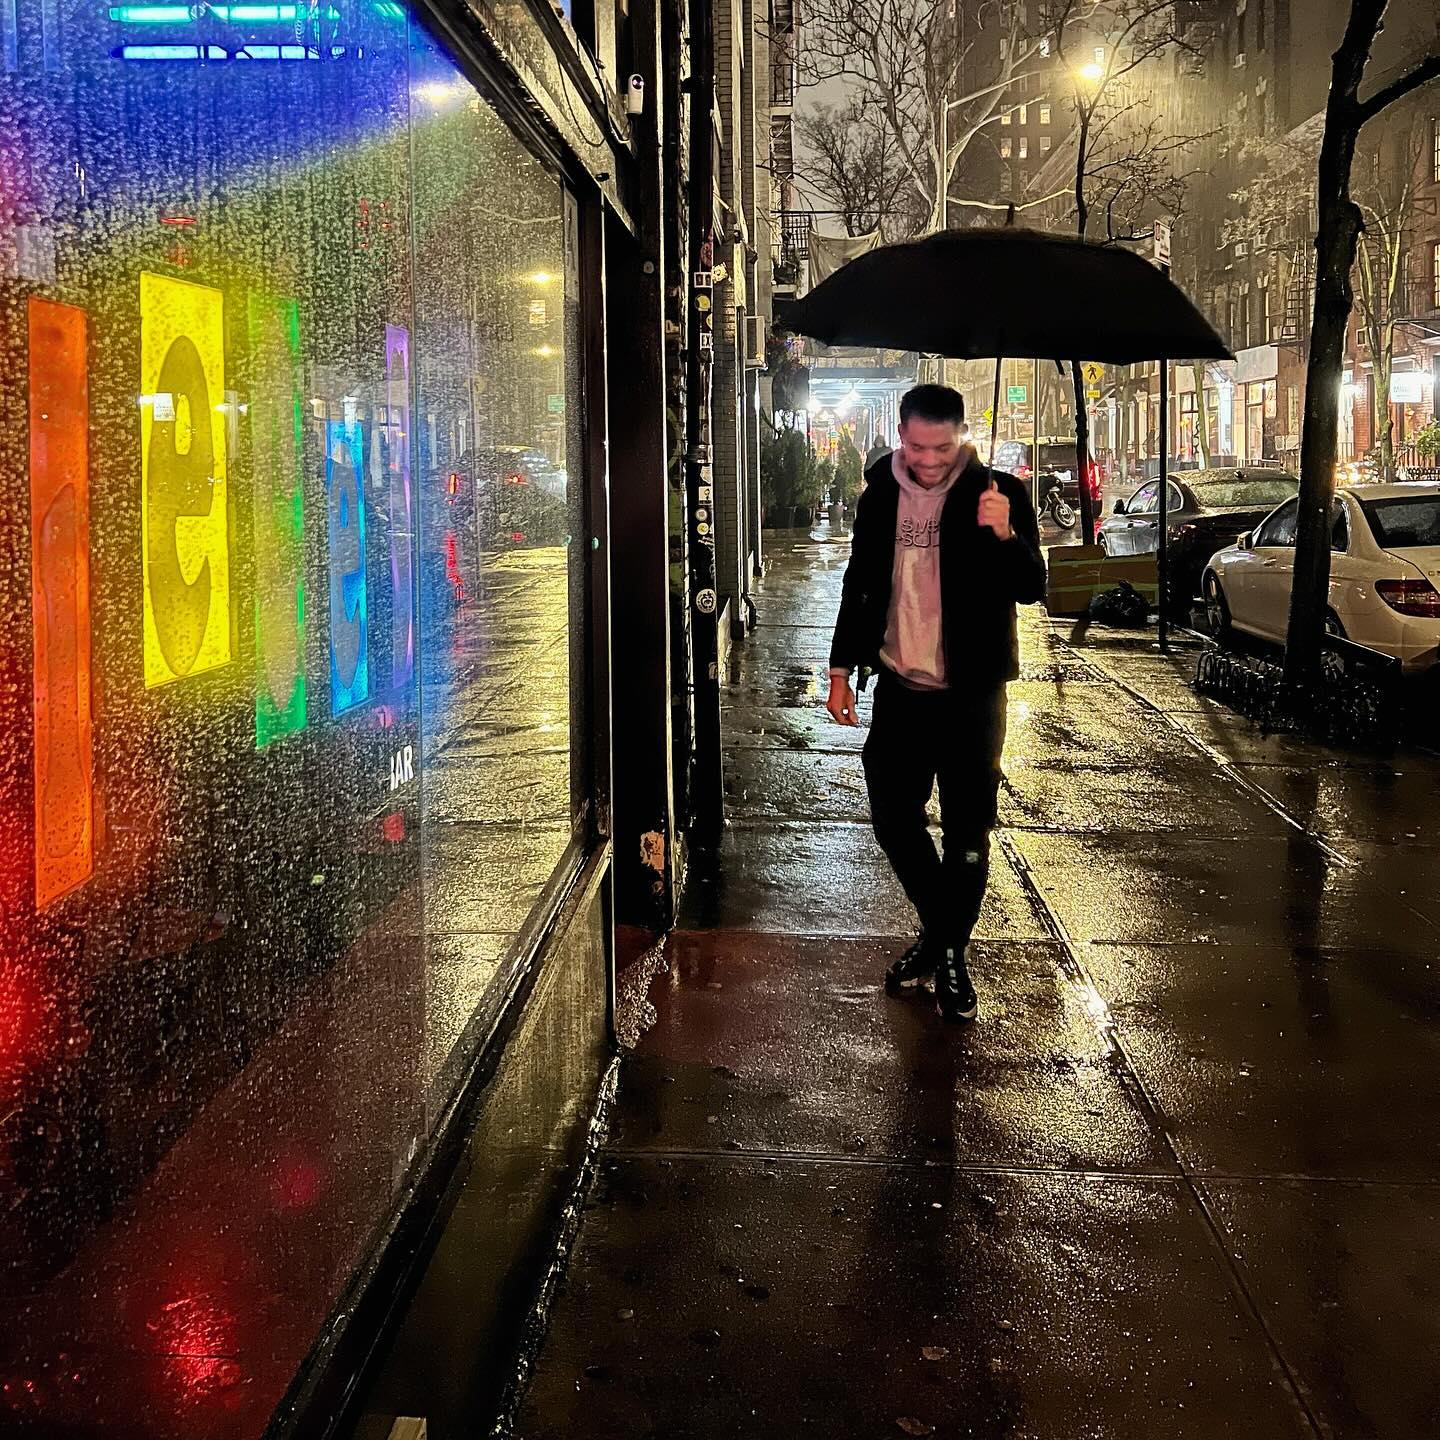 reset. back to the city. ☔️🗽
📸: @gregsull